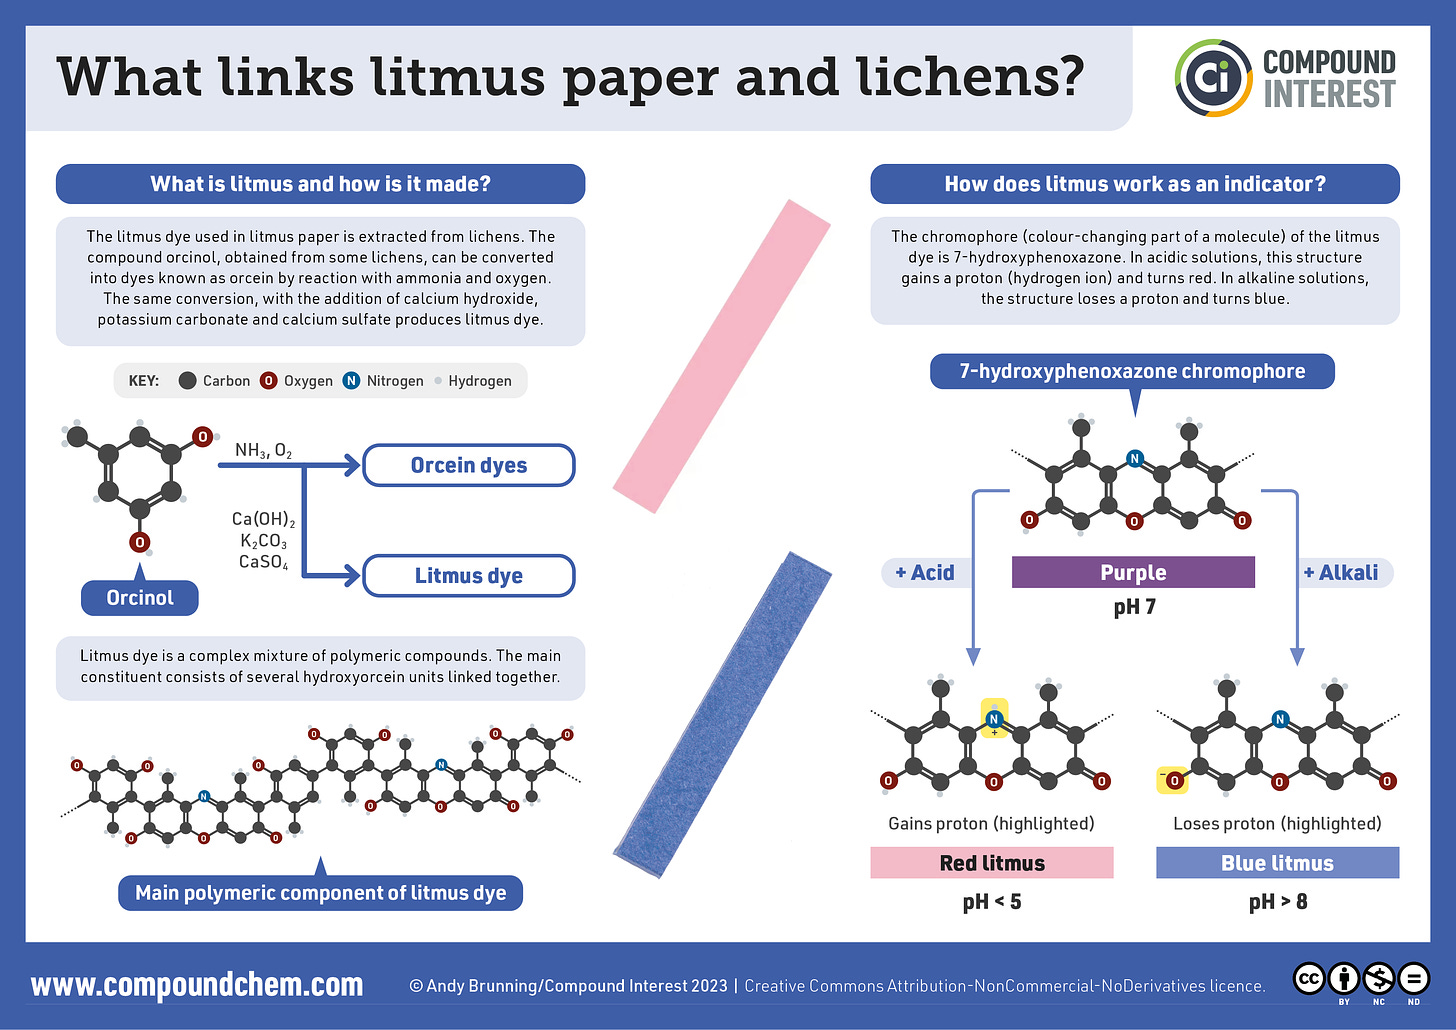 Infographic on litmus paper. The graphic explains how litmus dyes can be derived from orcinol, itself sourced from species of lichens. The chromophore of the litmus dye is 7-hydroxyphenoxazone. In acidic solutions, the protonated structure is red, while in alkaline solutions the deprotonated structure is blue.